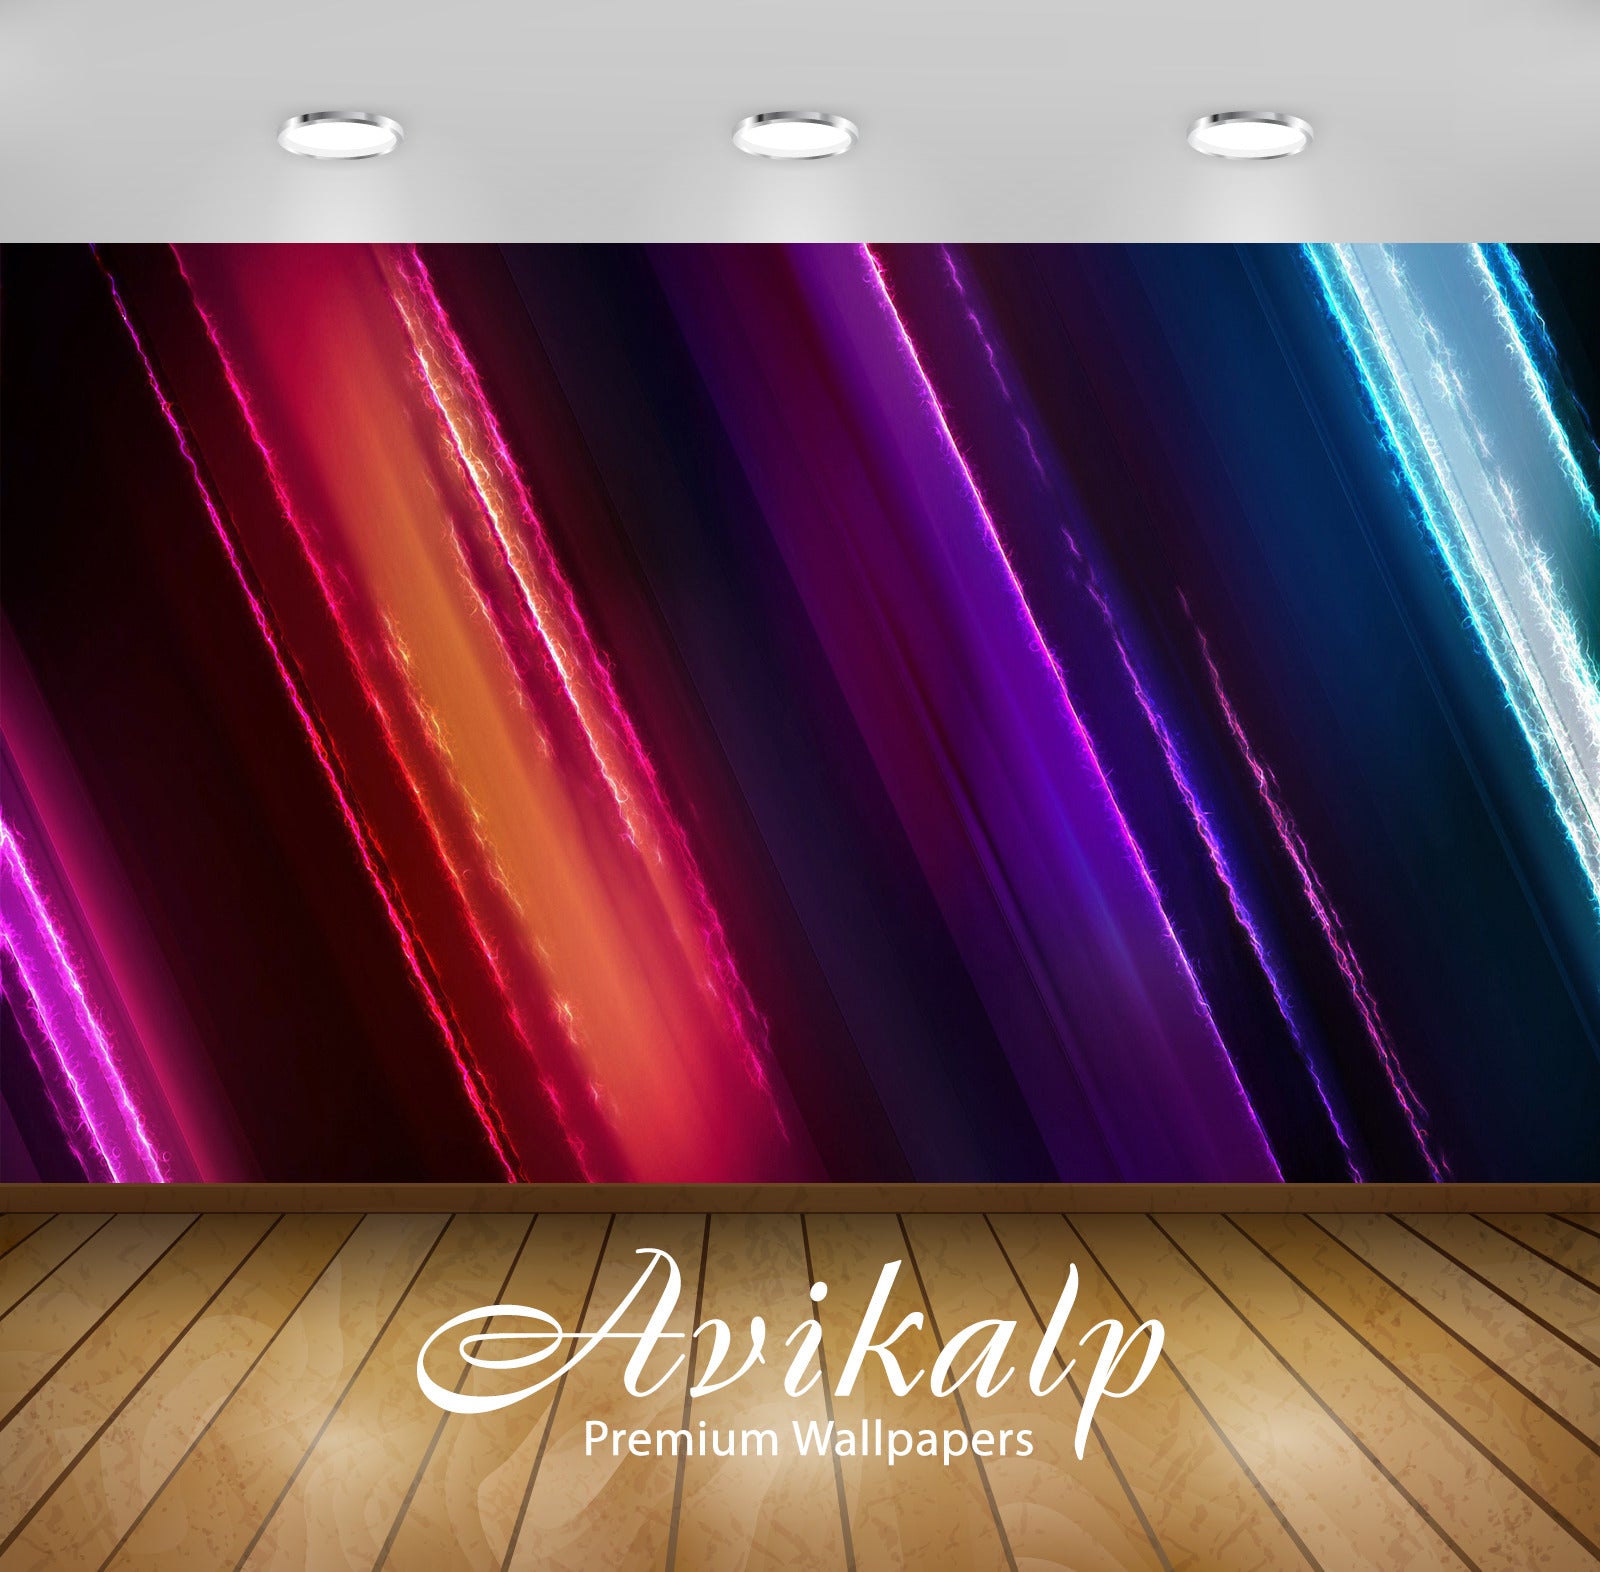 Avikalp Exclusive Awi4170 Colorful Lines Full HD Wallpapers for Living room, Hall, Kids Room, Kitche